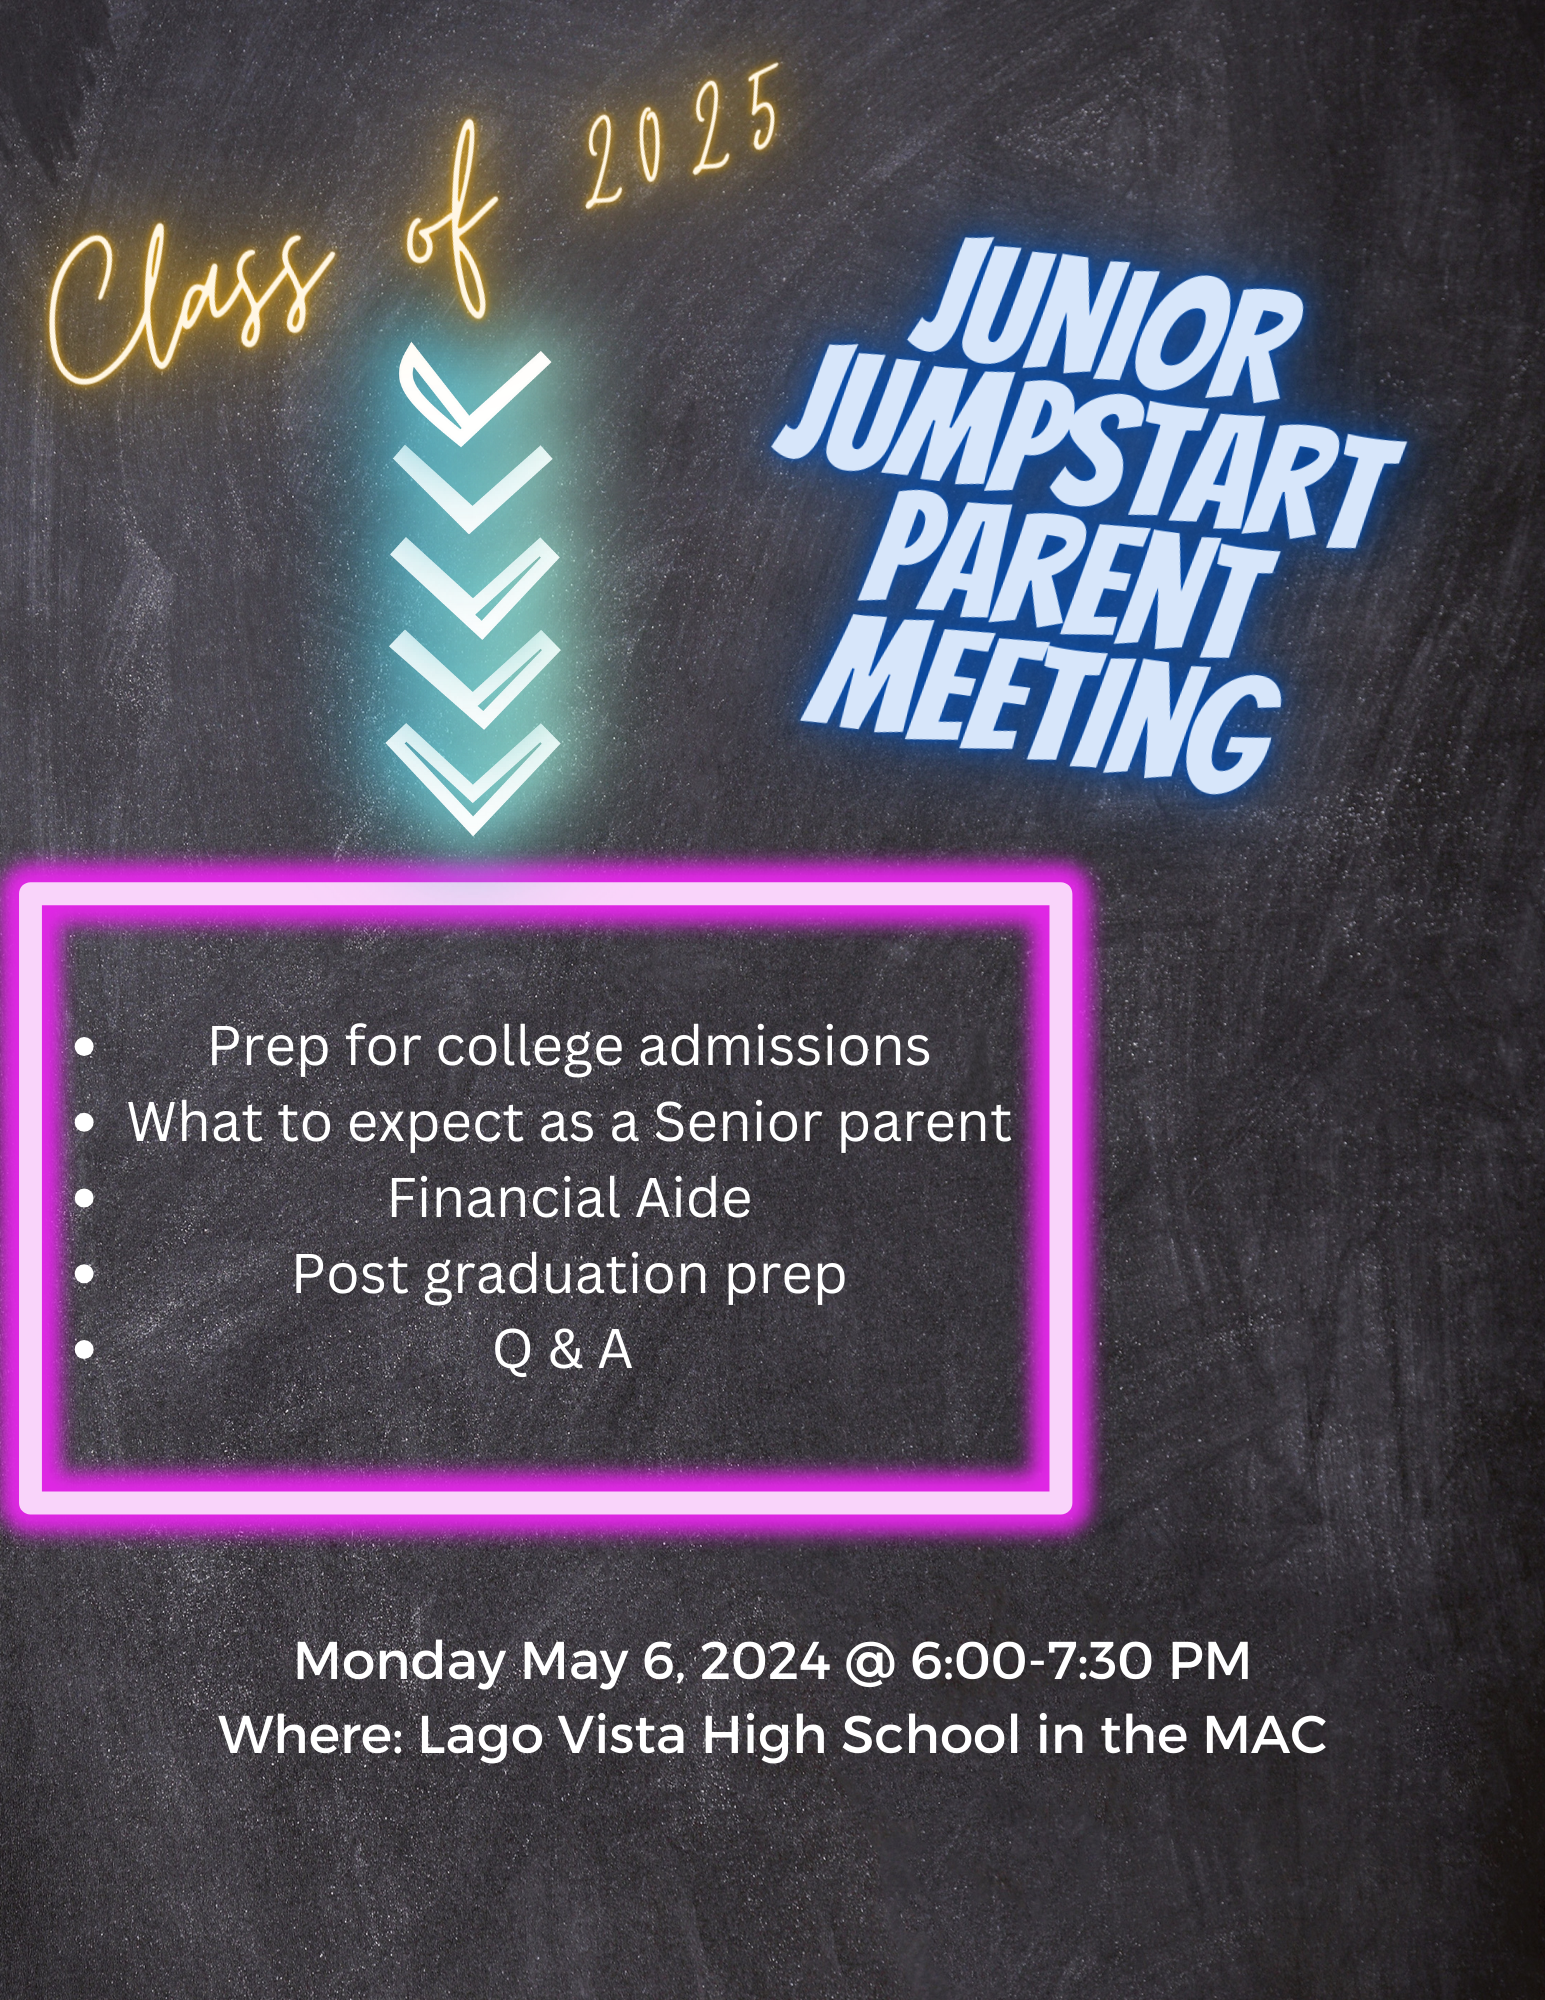 Parents and Juniors, join us in the MAC at LVHS on Monday, May 6th at 6pm. We will discuss college admissions, financial aid, what to expect as a senior parent and more.